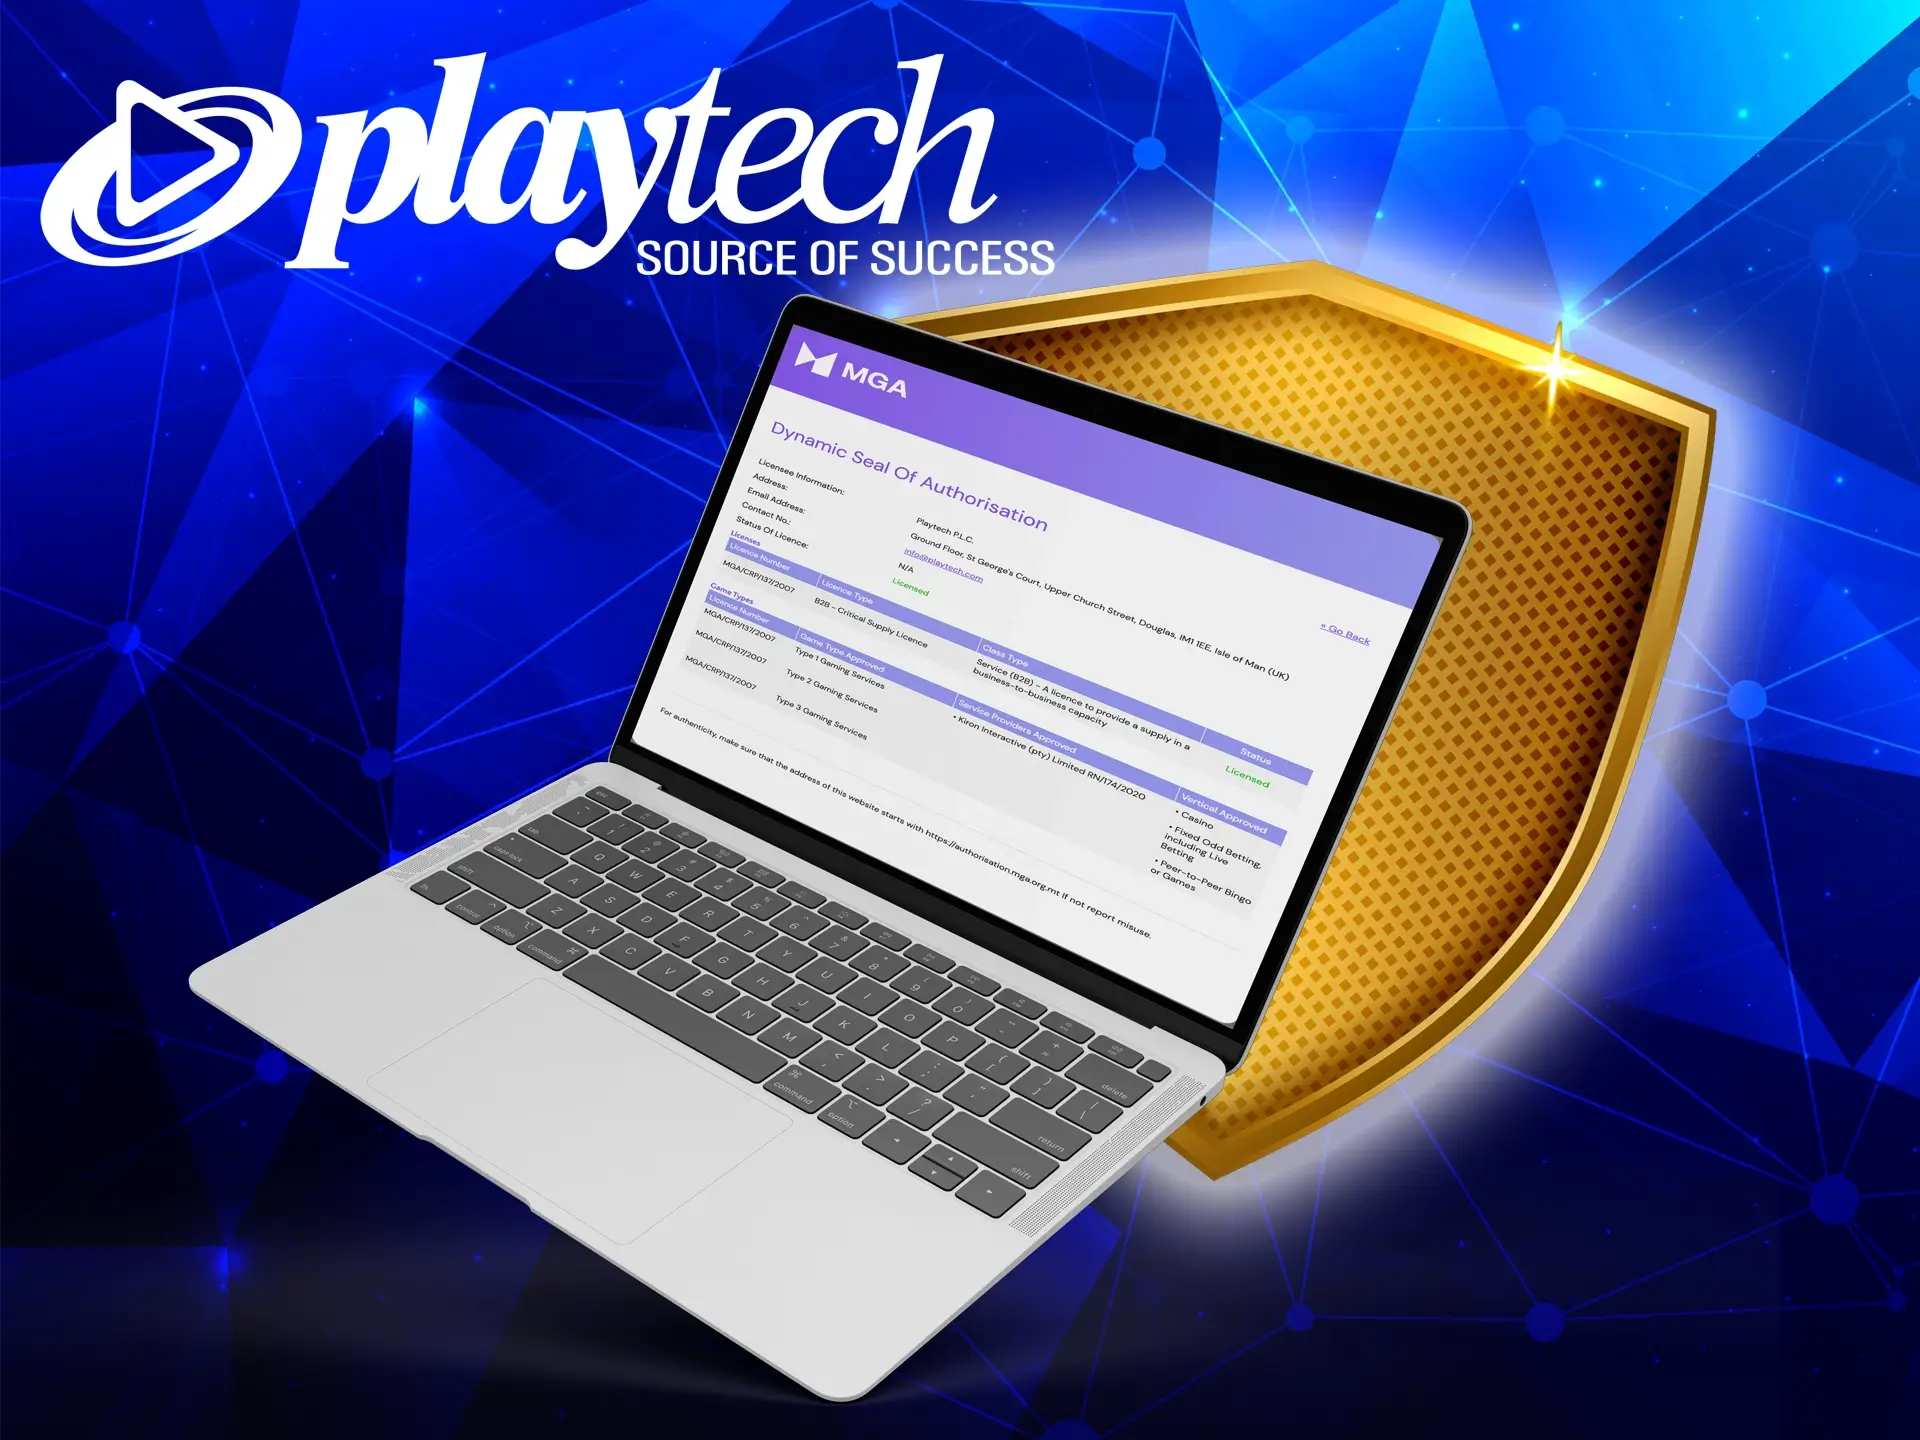 Playtech has all the documents and licence to operate.